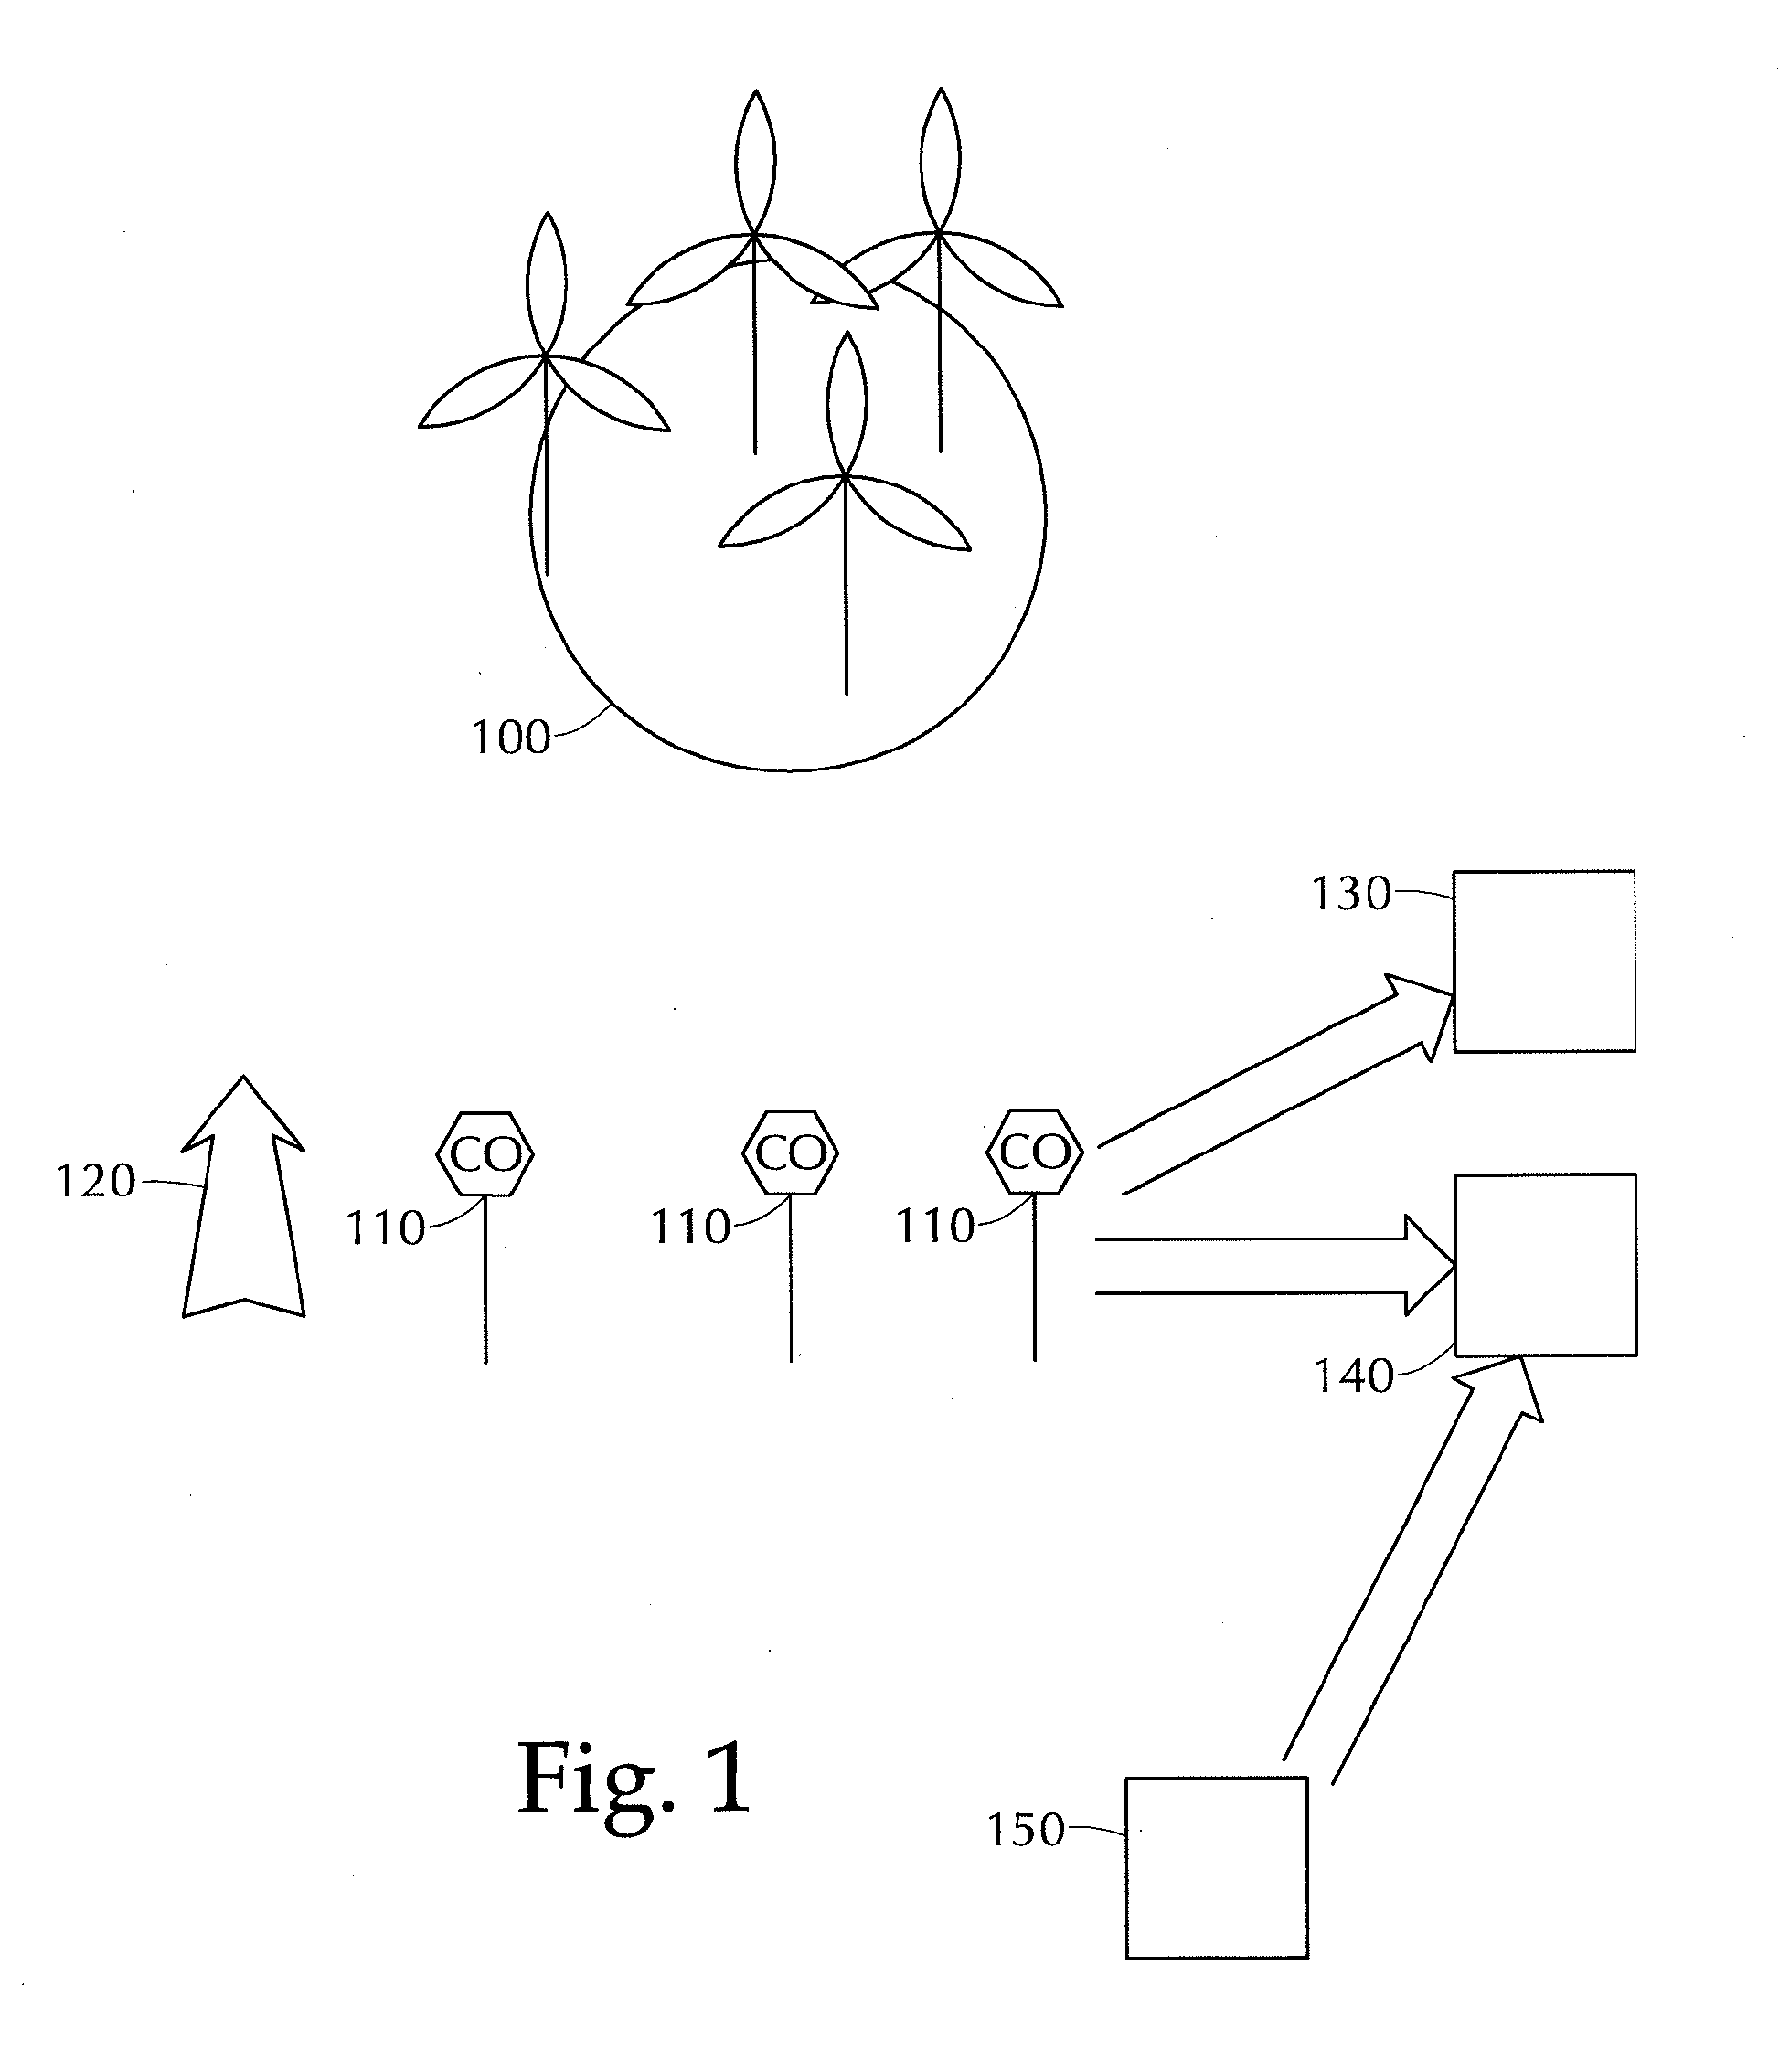 Systems and methods for wind forecasting and grid management